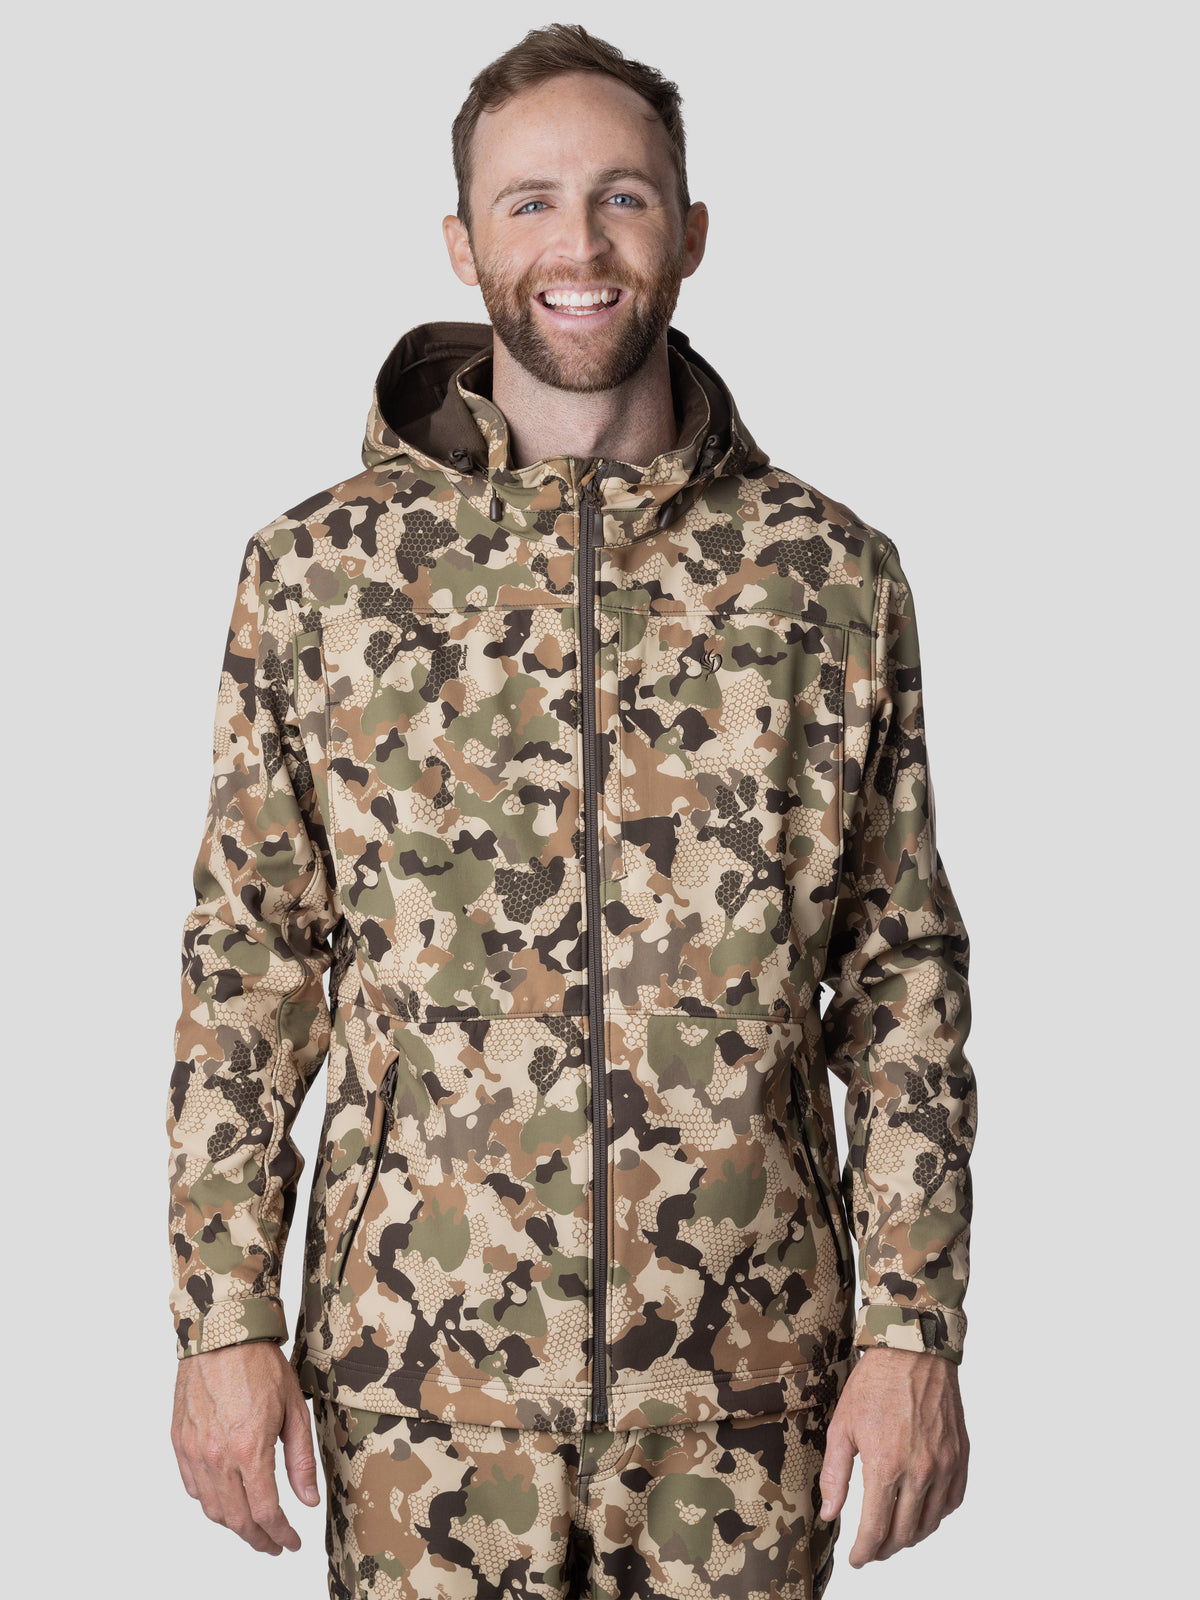 Duck Camp Contact Softshell Jacket - Wetland Camouflage, M